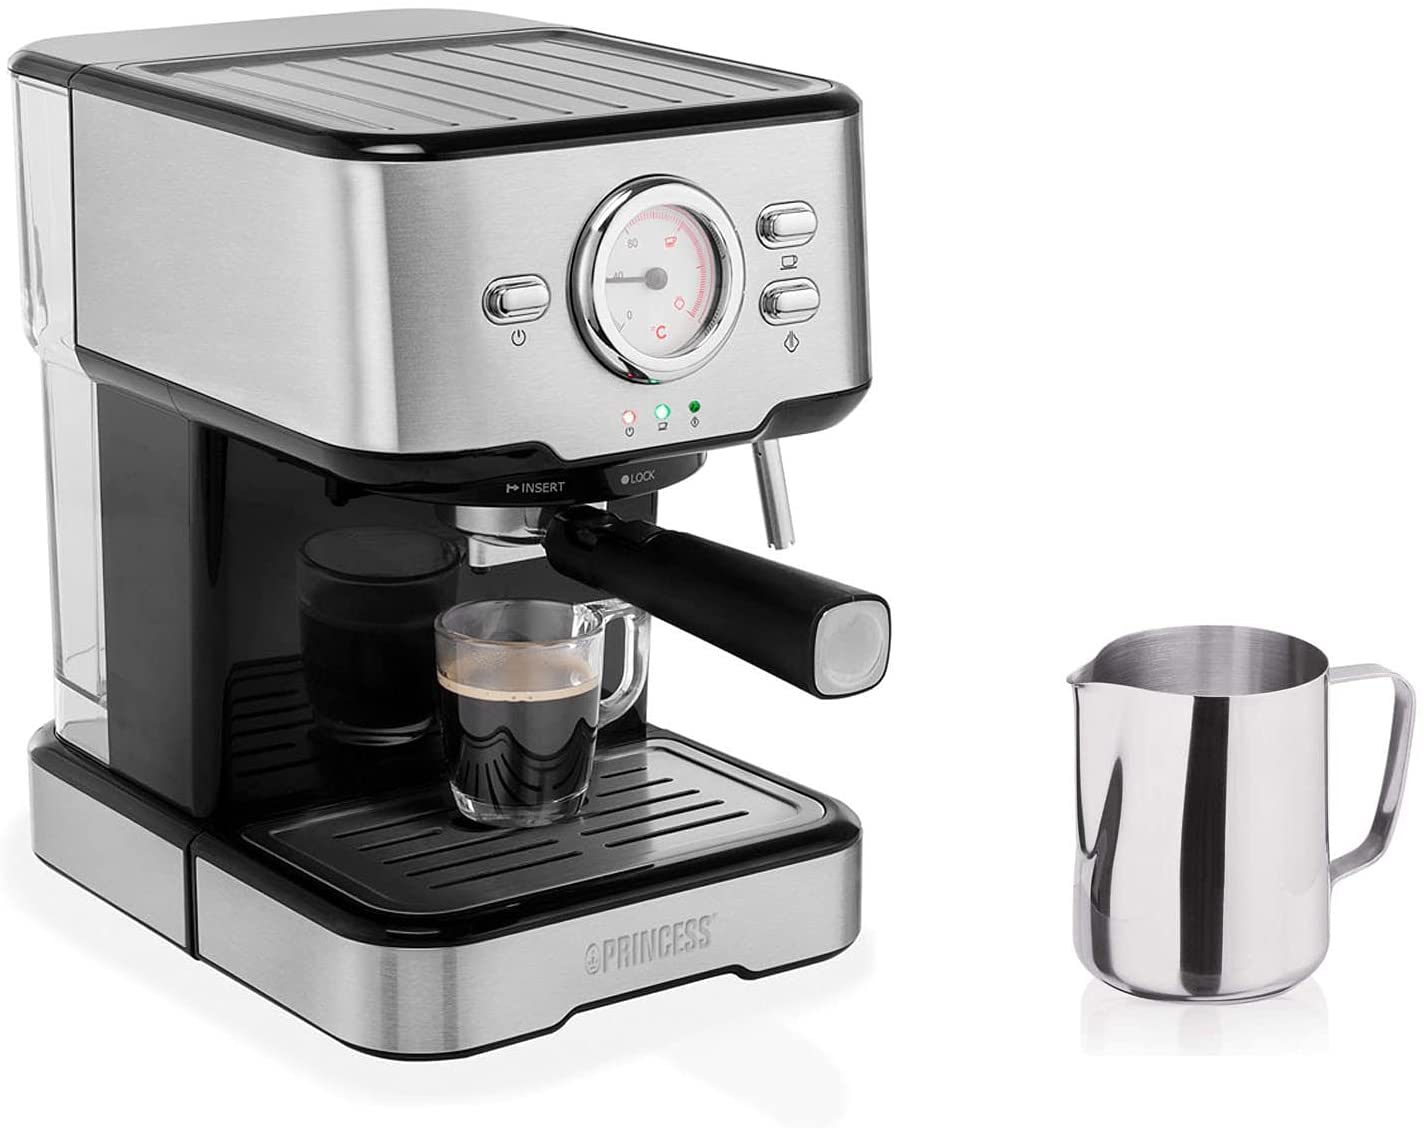 Espressomaschine Espresso and Capsule Machine with Milk Frother for Cappuccino, Latte and Es